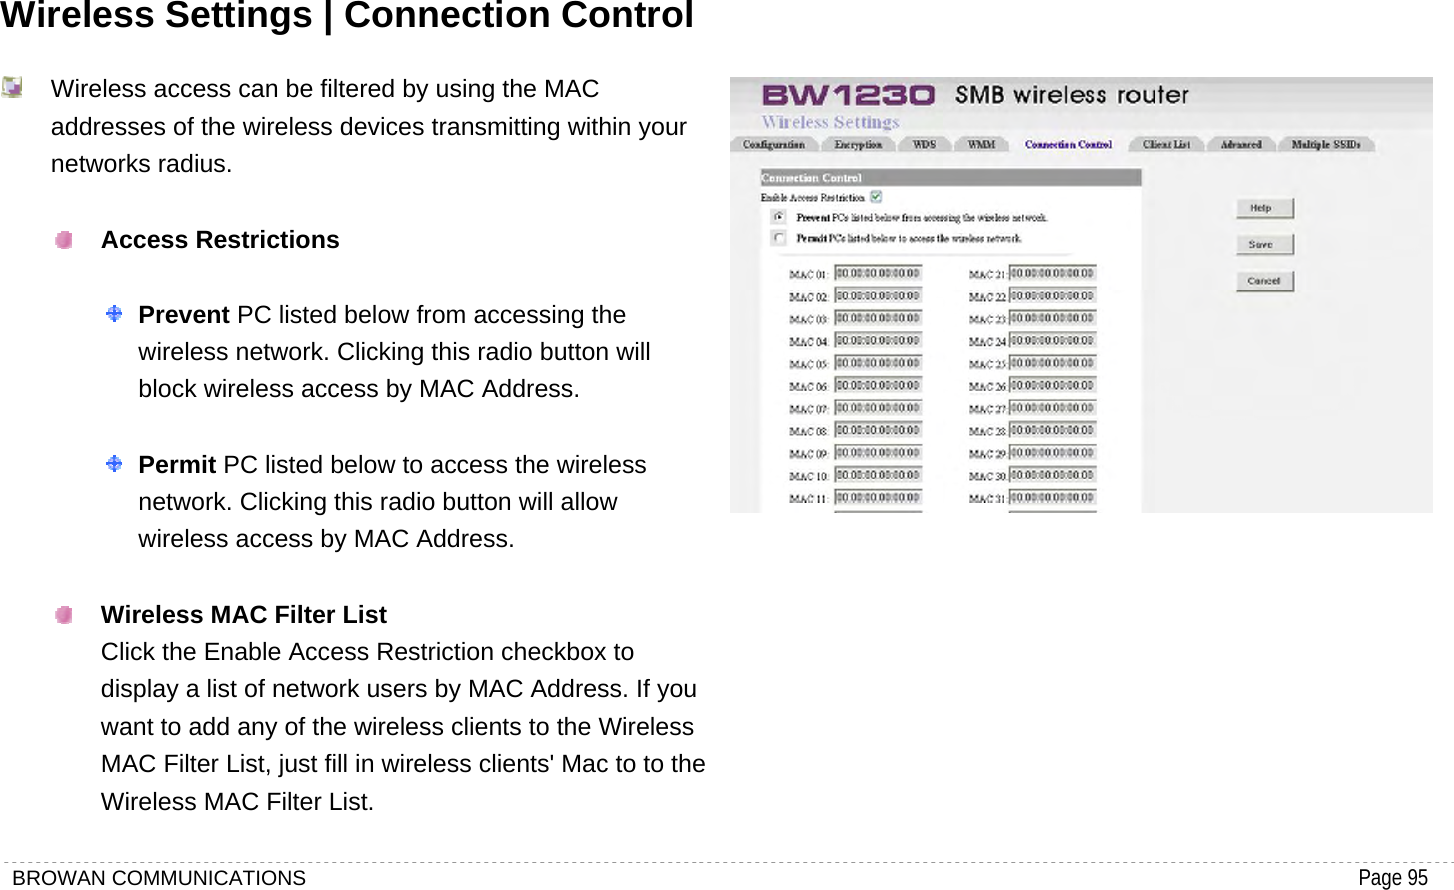 BROWAN COMMUNICATIONS                                                                                           Page 95  Wireless Settings | Connection Control   Wireless access can be filtered by using the MAC addresses of the wireless devices transmitting within your networks radius.     Access Restrictions     Prevent PC listed below from accessing the wireless network. Clicking this radio button will block wireless access by MAC Address.     Permit PC listed below to access the wireless network. Clicking this radio button will allow wireless access by MAC Address.     Wireless MAC Filter List   Click the Enable Access Restriction checkbox to display a list of network users by MAC Address. If you want to add any of the wireless clients to the Wireless MAC Filter List, just fill in wireless clients&apos; Mac to to the Wireless MAC Filter List.  